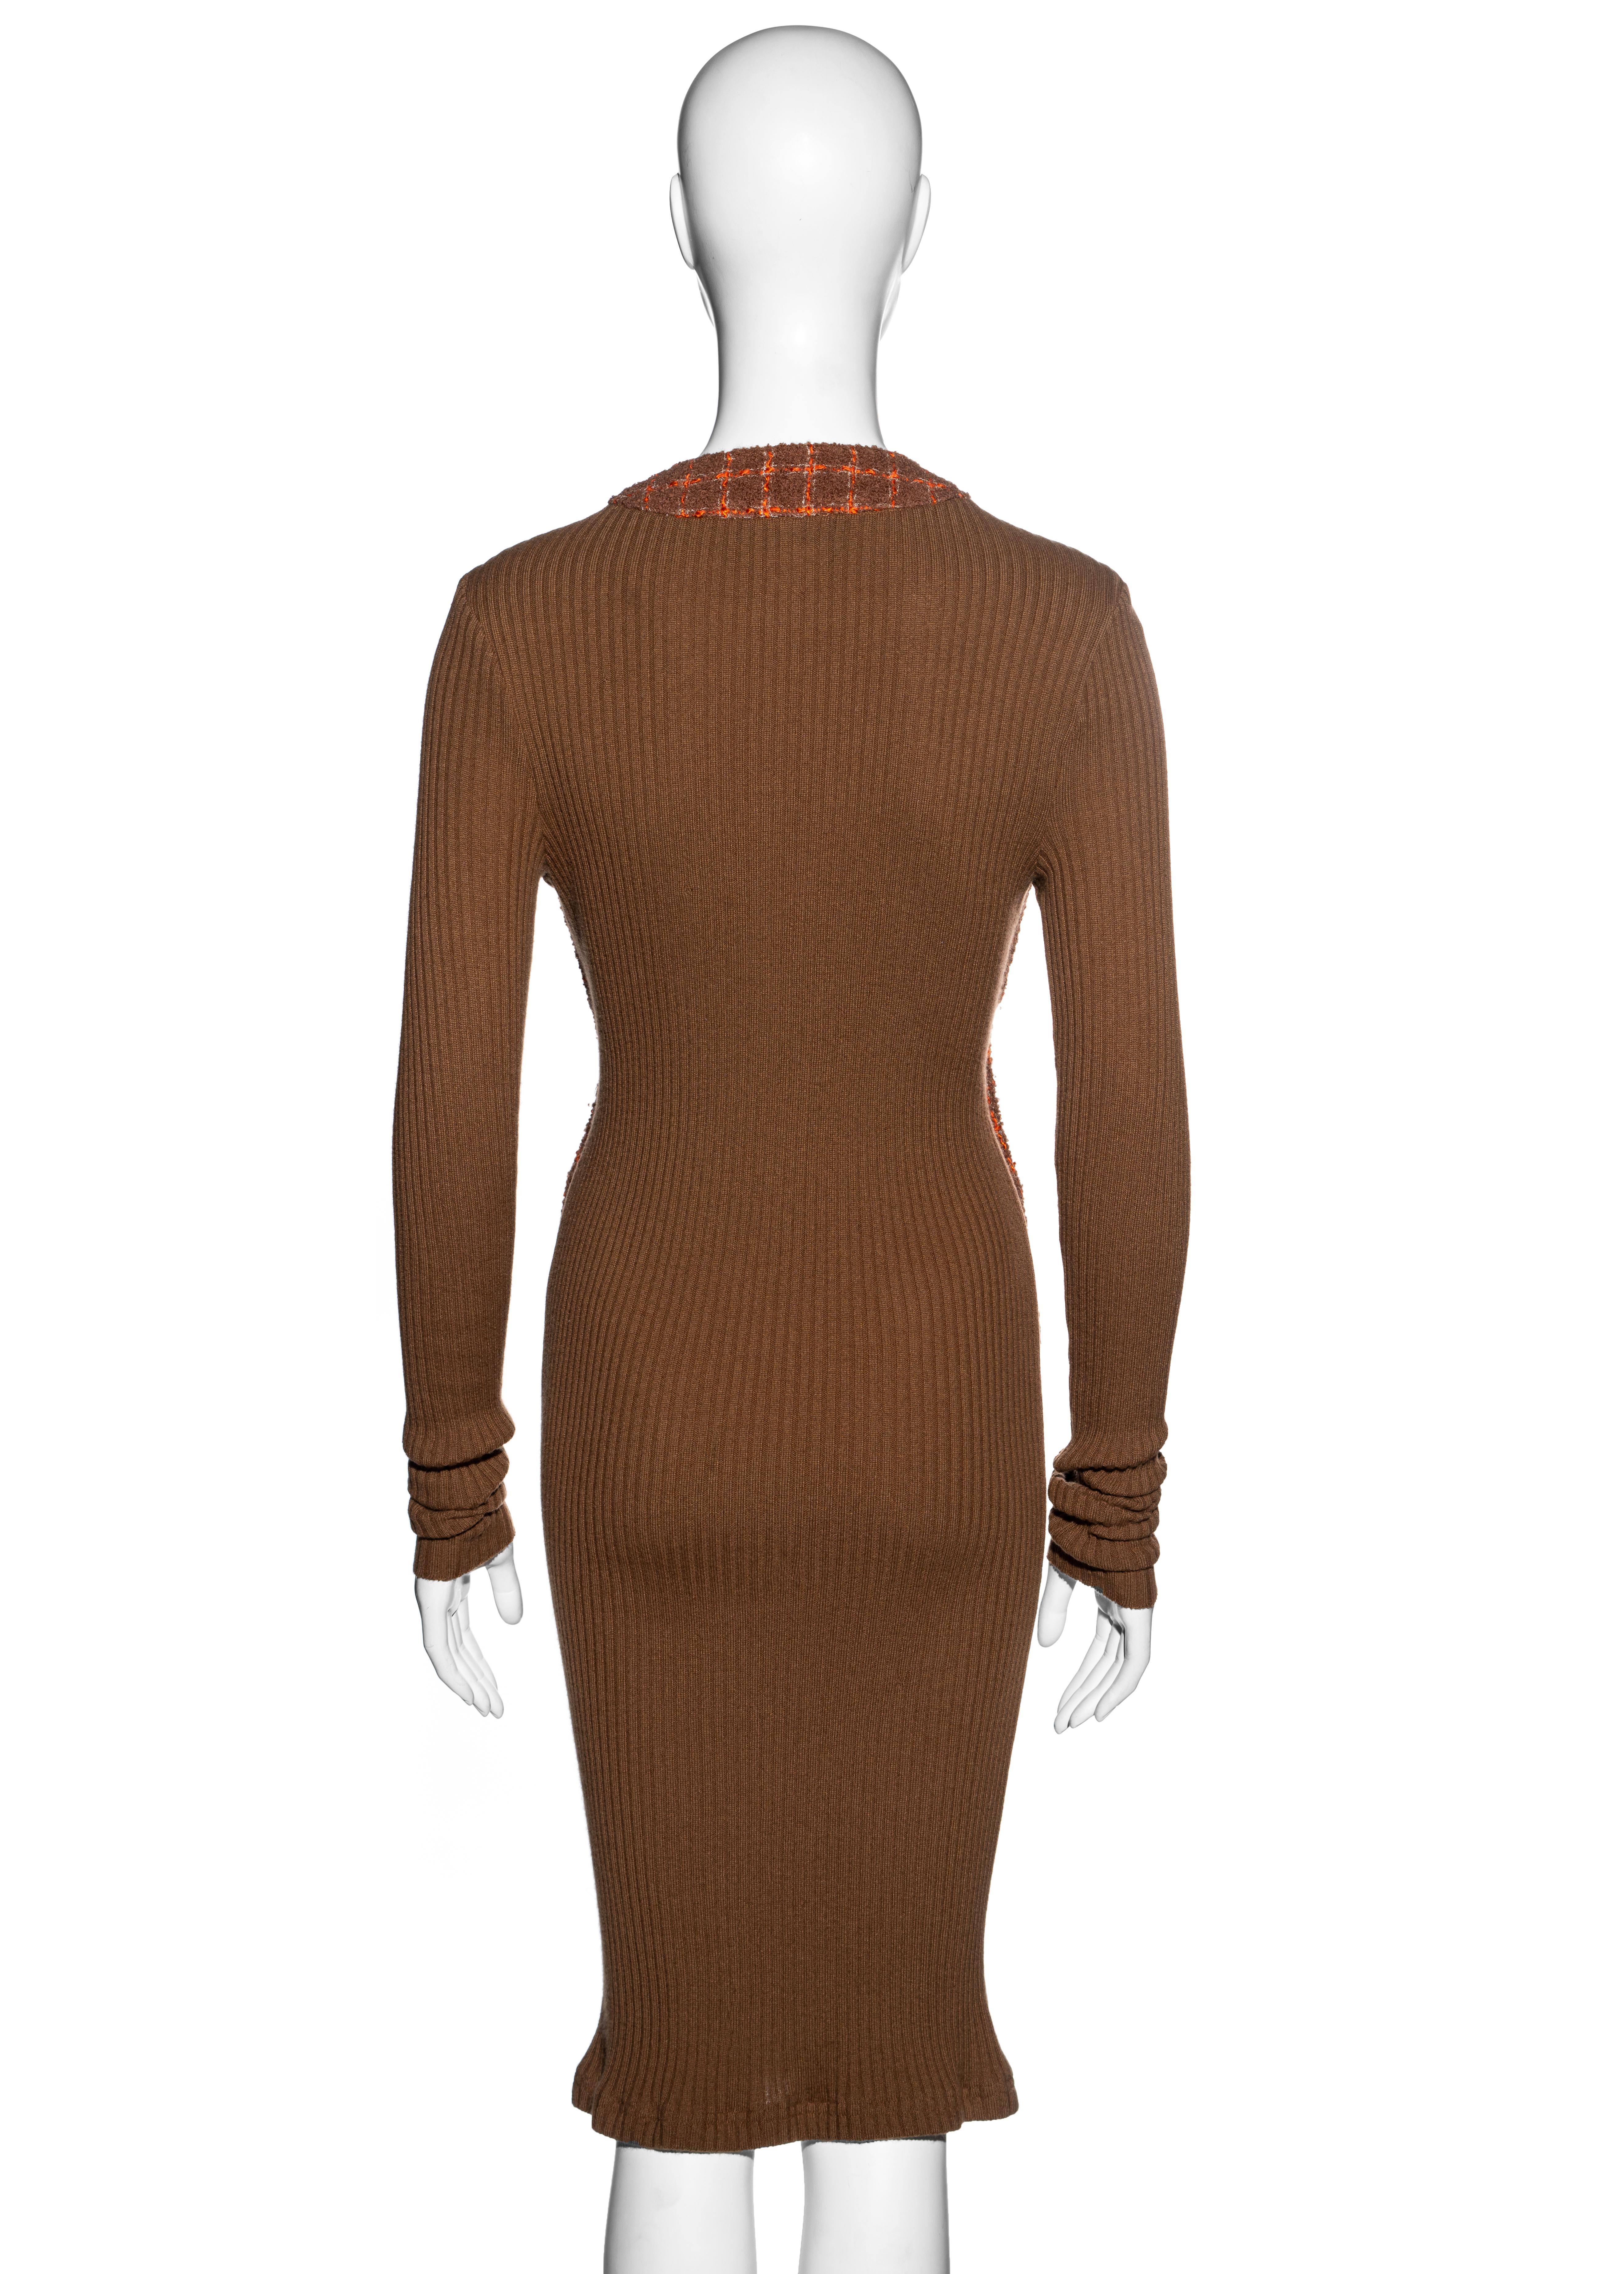 Chanel by Karl Lagerfeld orange and brown knit and tweed jacket dress, fw 1995 For Sale 5